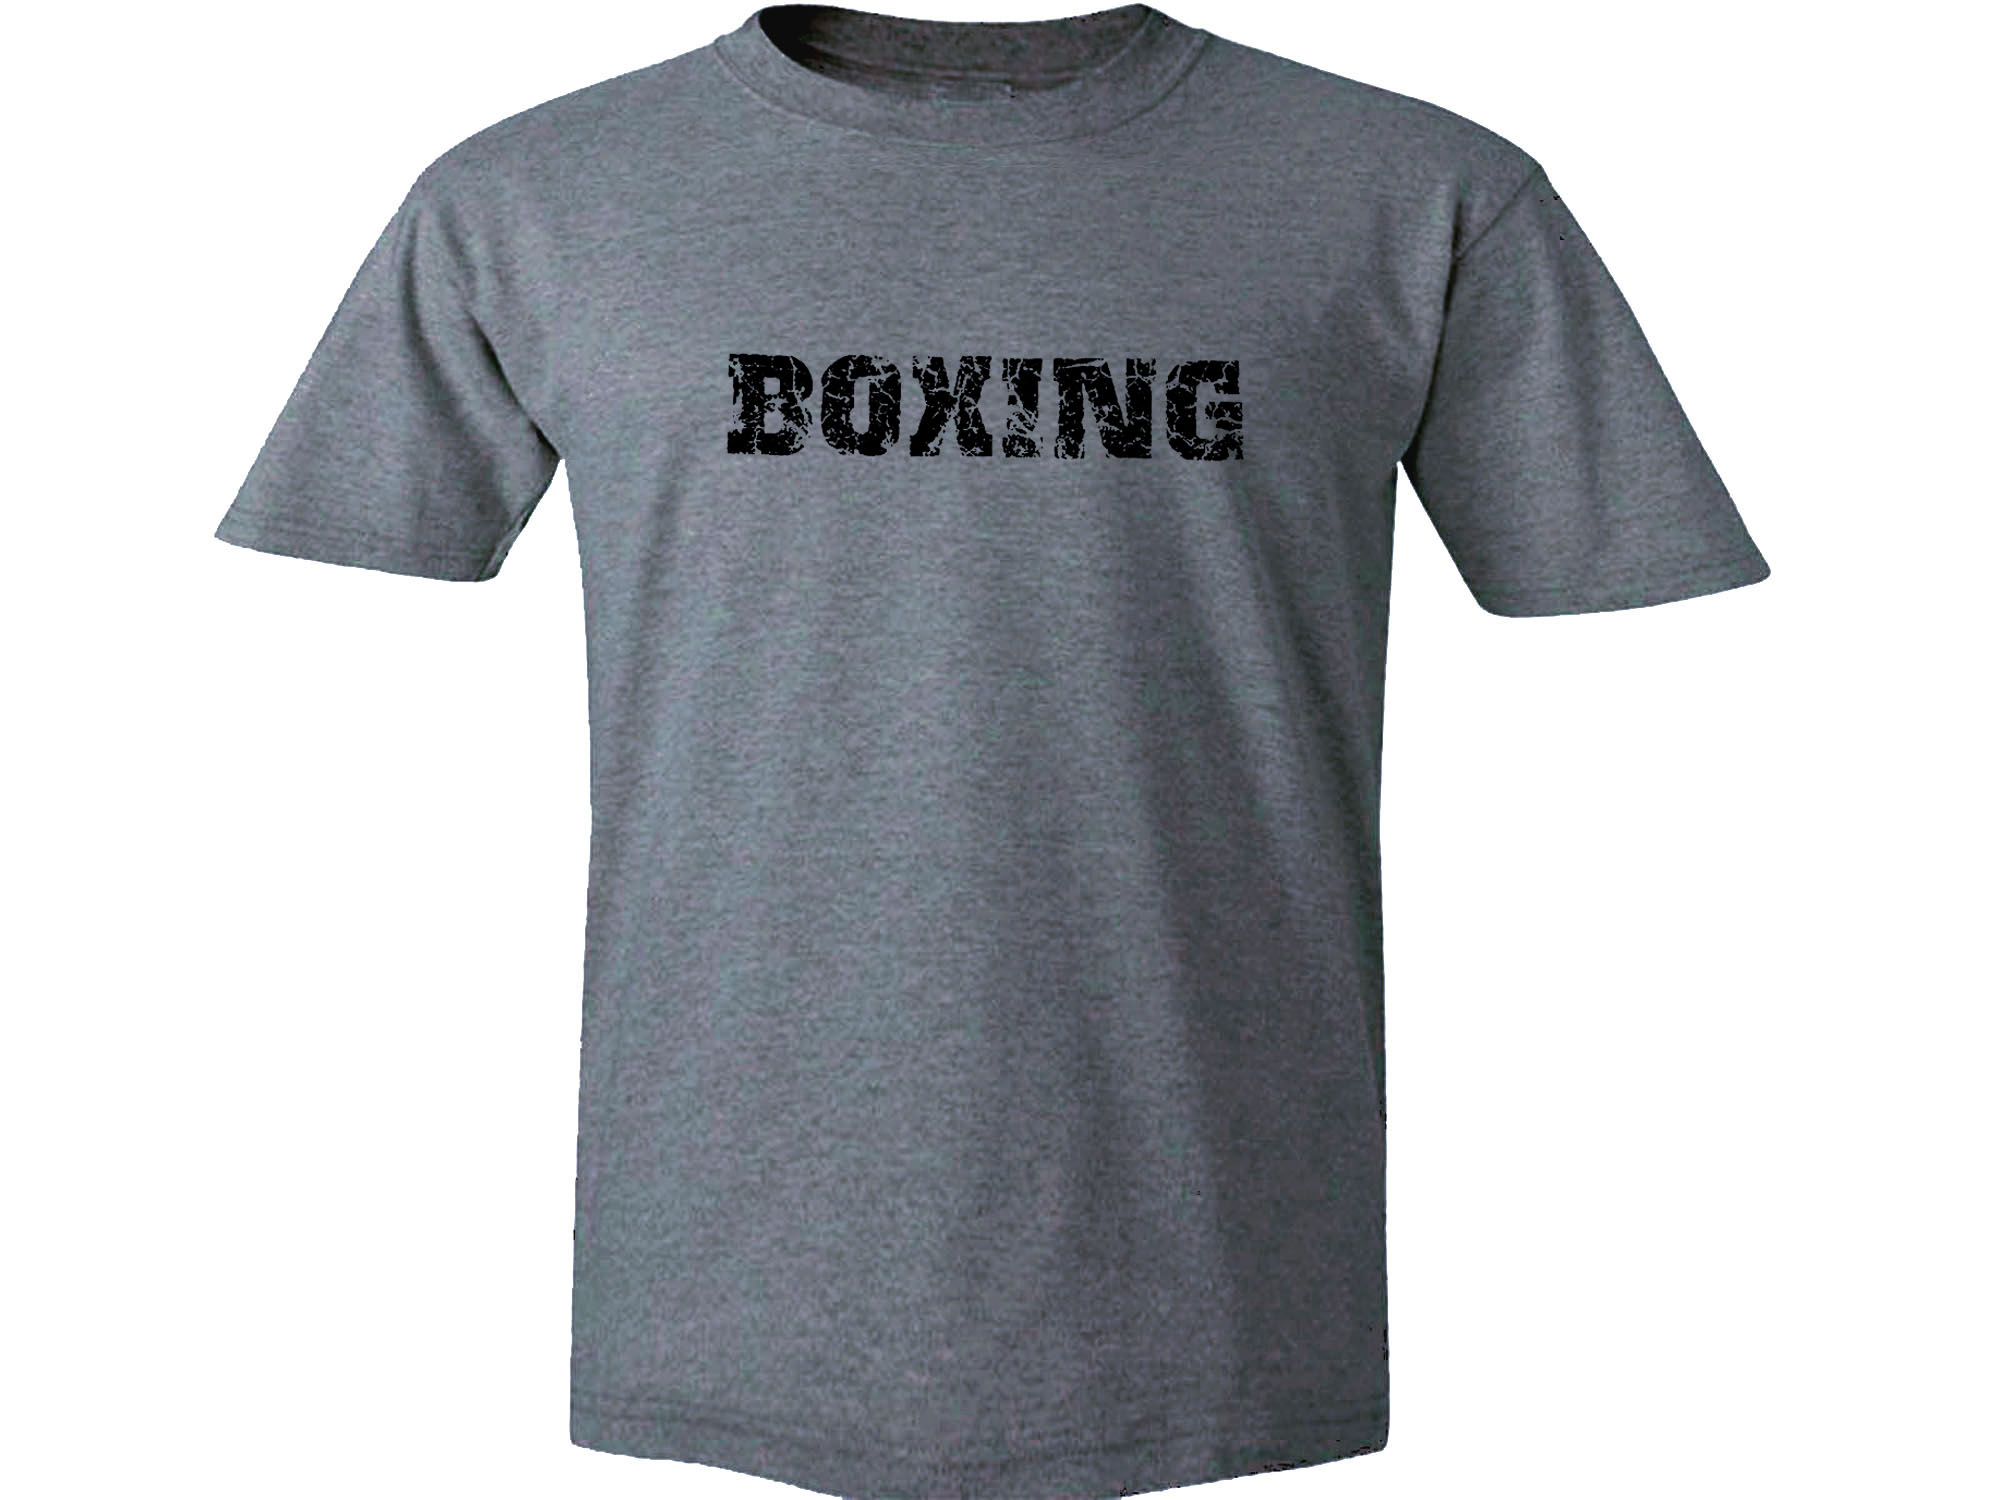 Boxing distressed print customized gray t-shirt